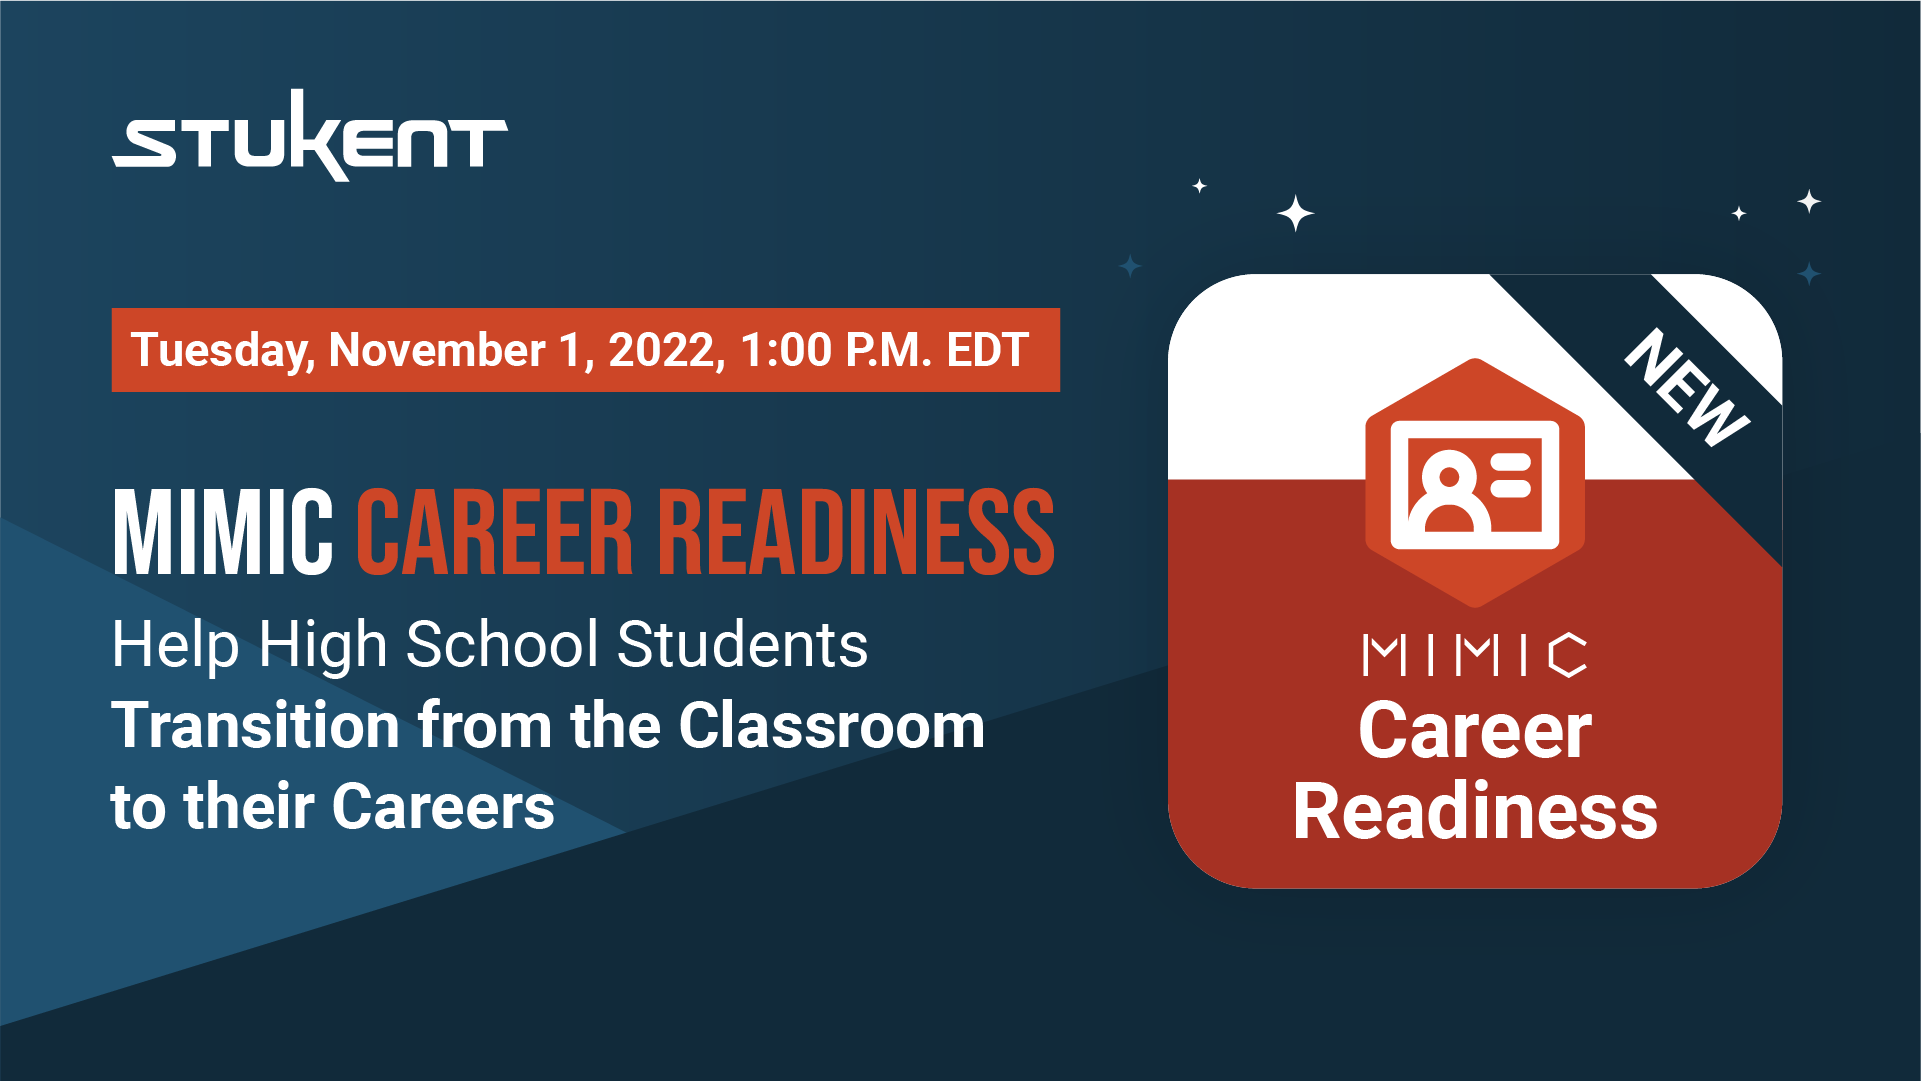 Mimic Career Readiness: Help High School Students Transition from the Classroom to their Careers